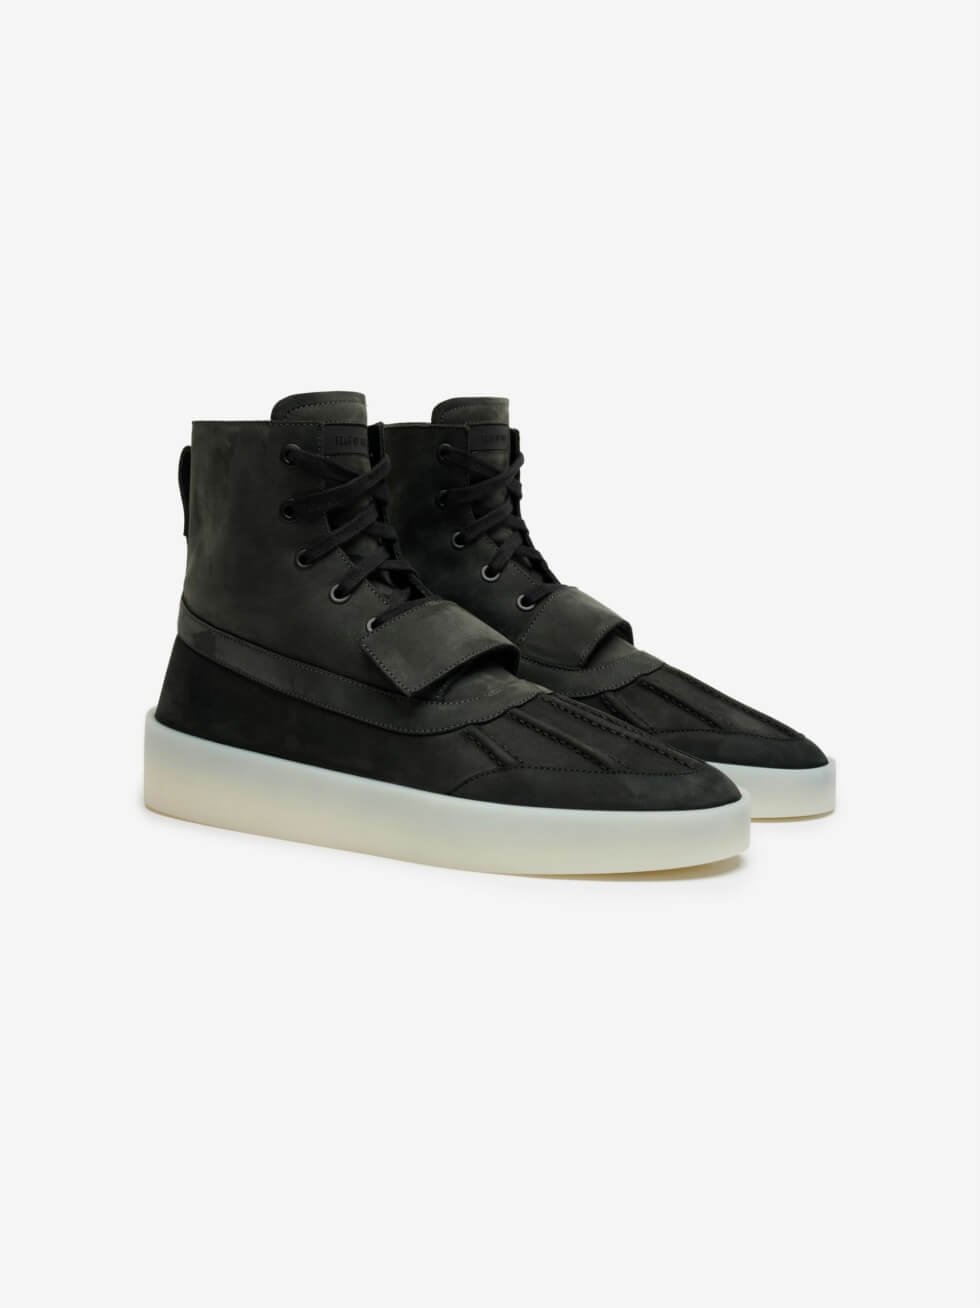 Style Up For The Colder Season With The Fear of God DuckBoot